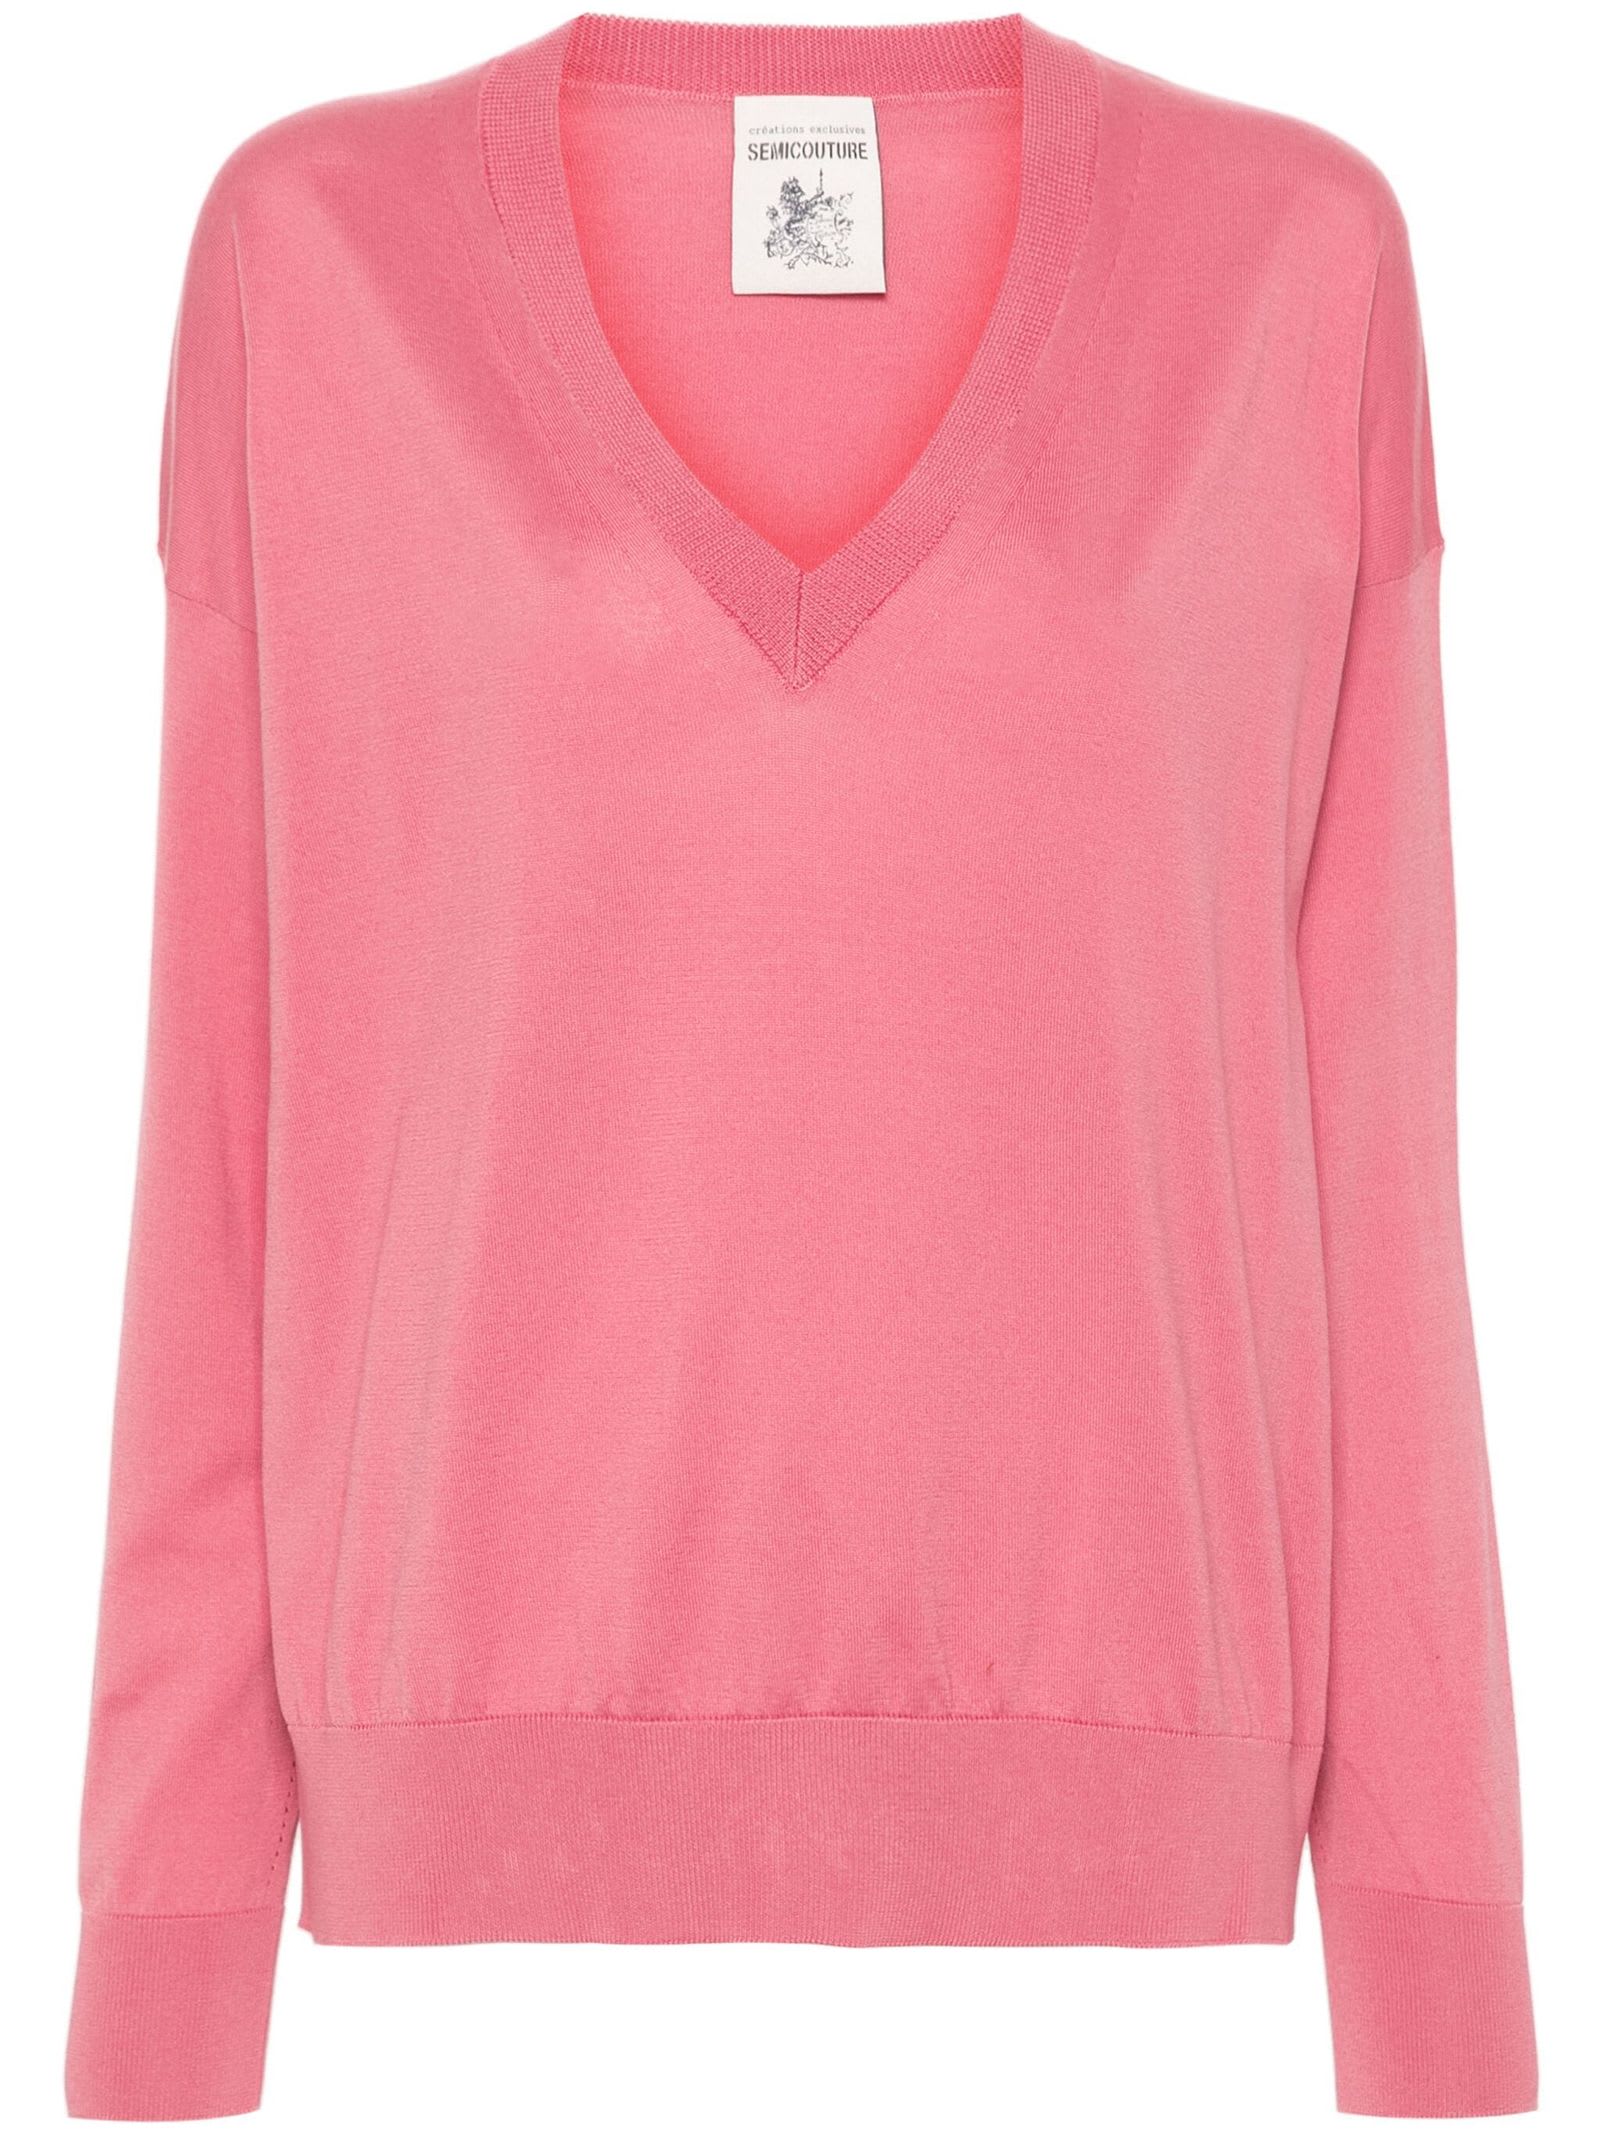 Pink Cotton Sweater